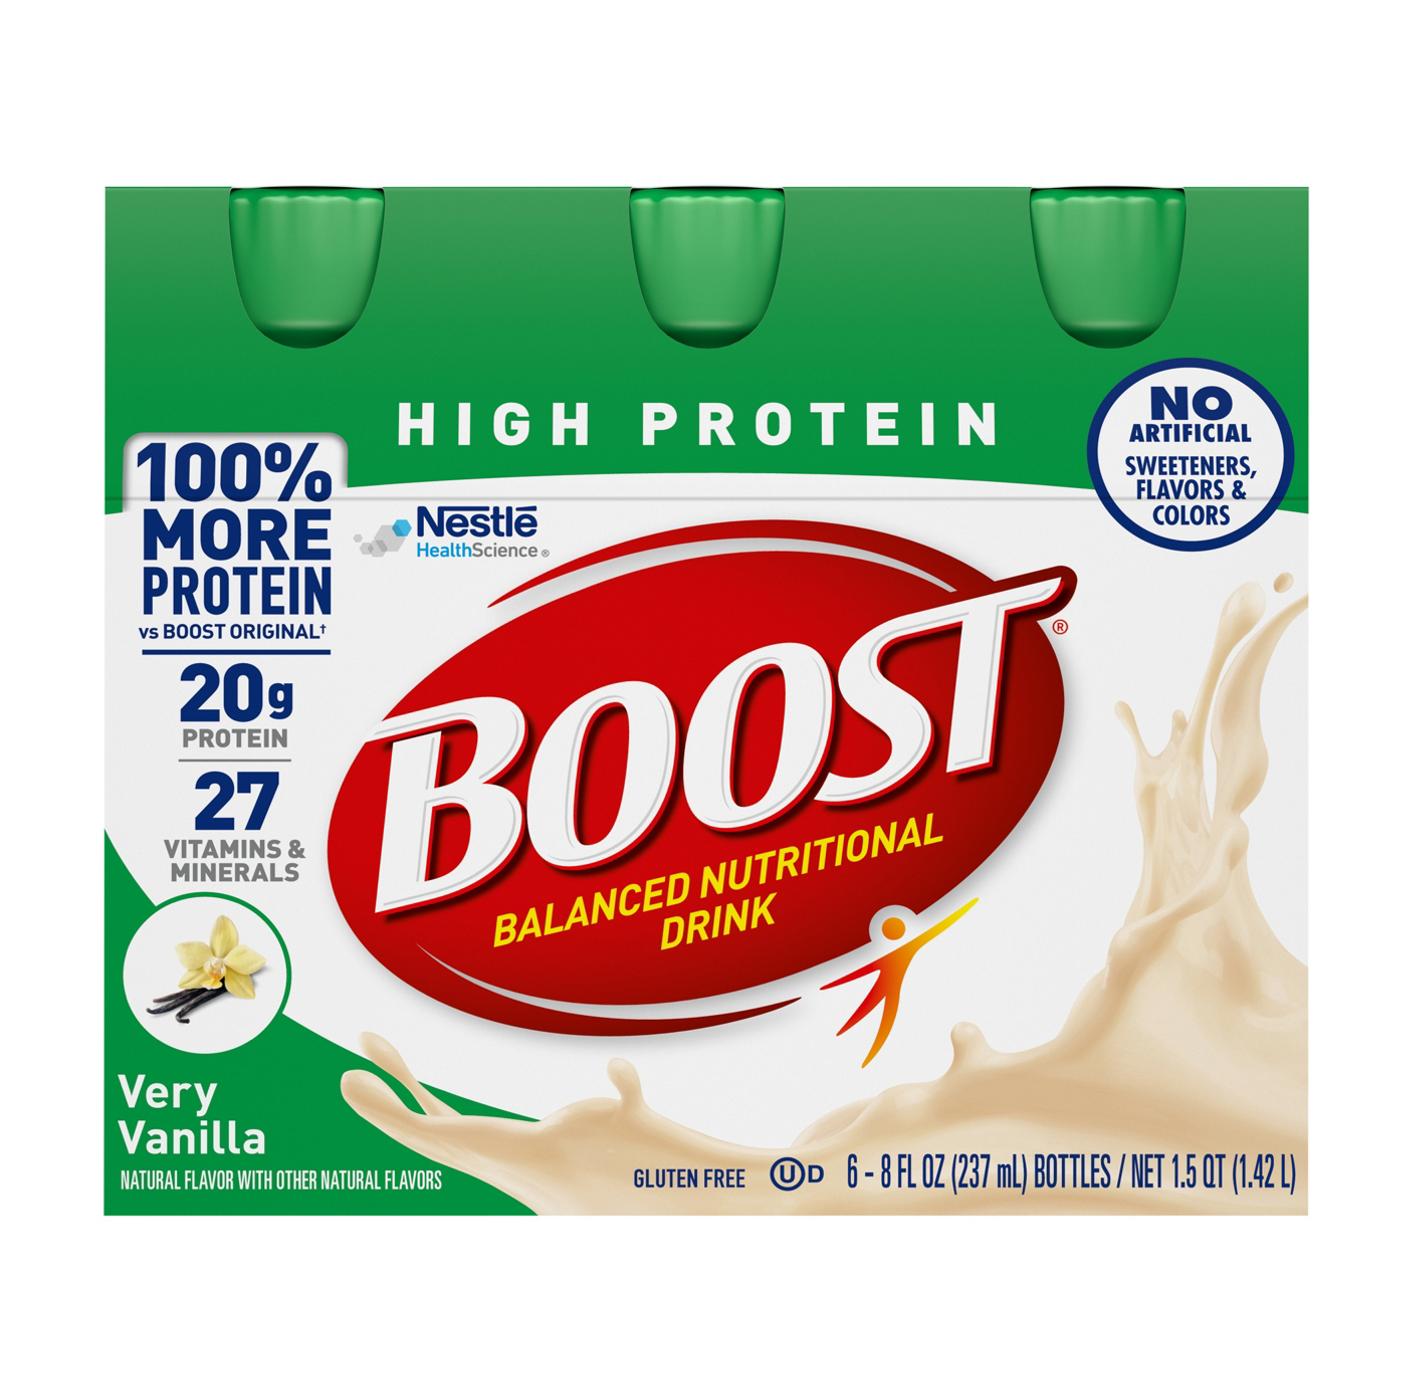 BOOST High Protein Nutritional Drink - Very Vanilla, 6 pk; image 1 of 2